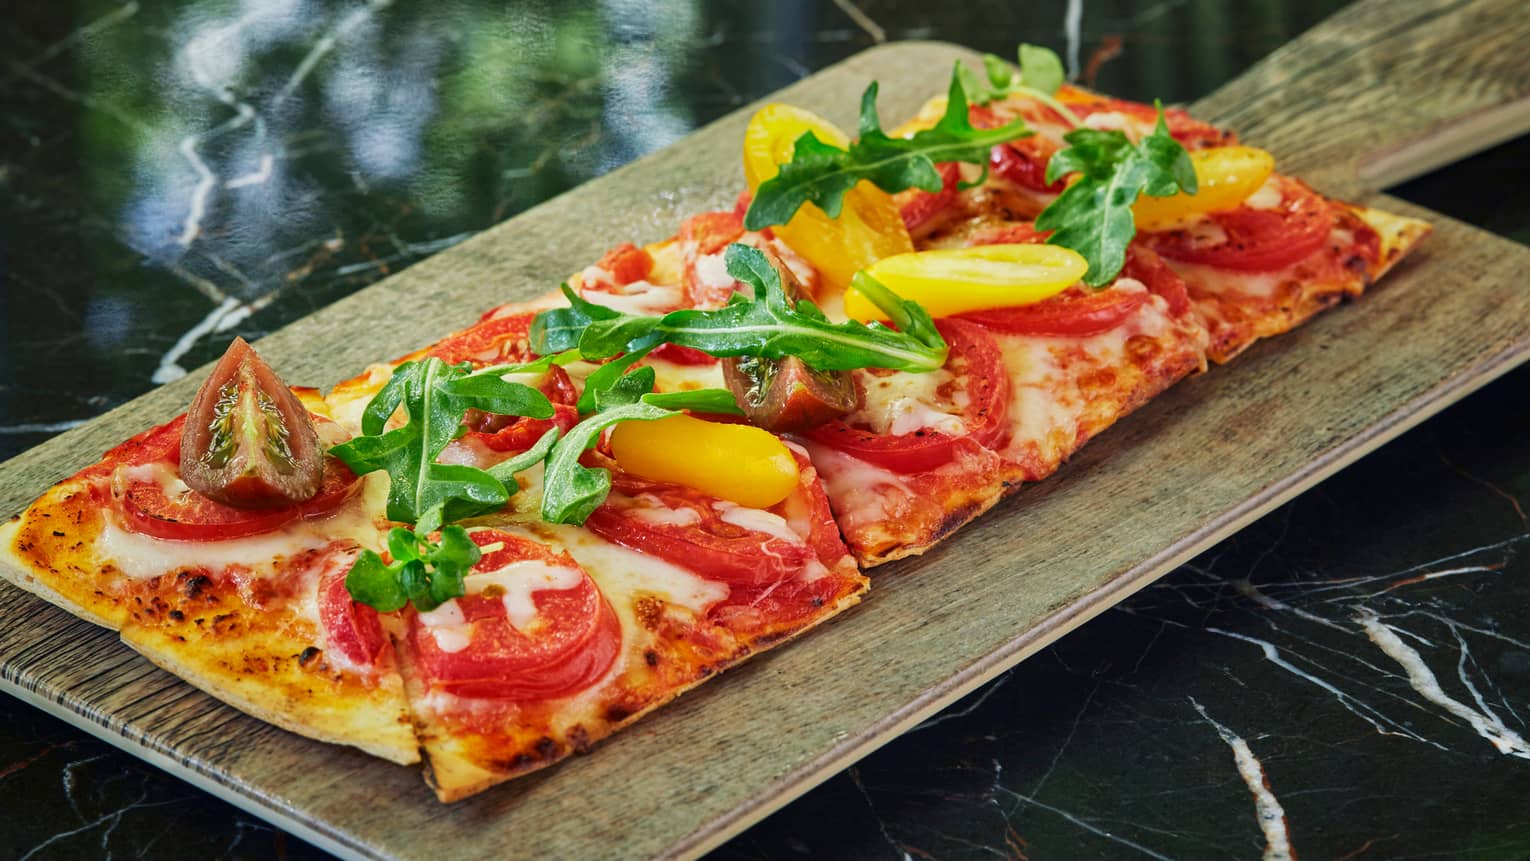 Wood-fired Flatbread pizza topped with tomatoes, fresh greens on wood board